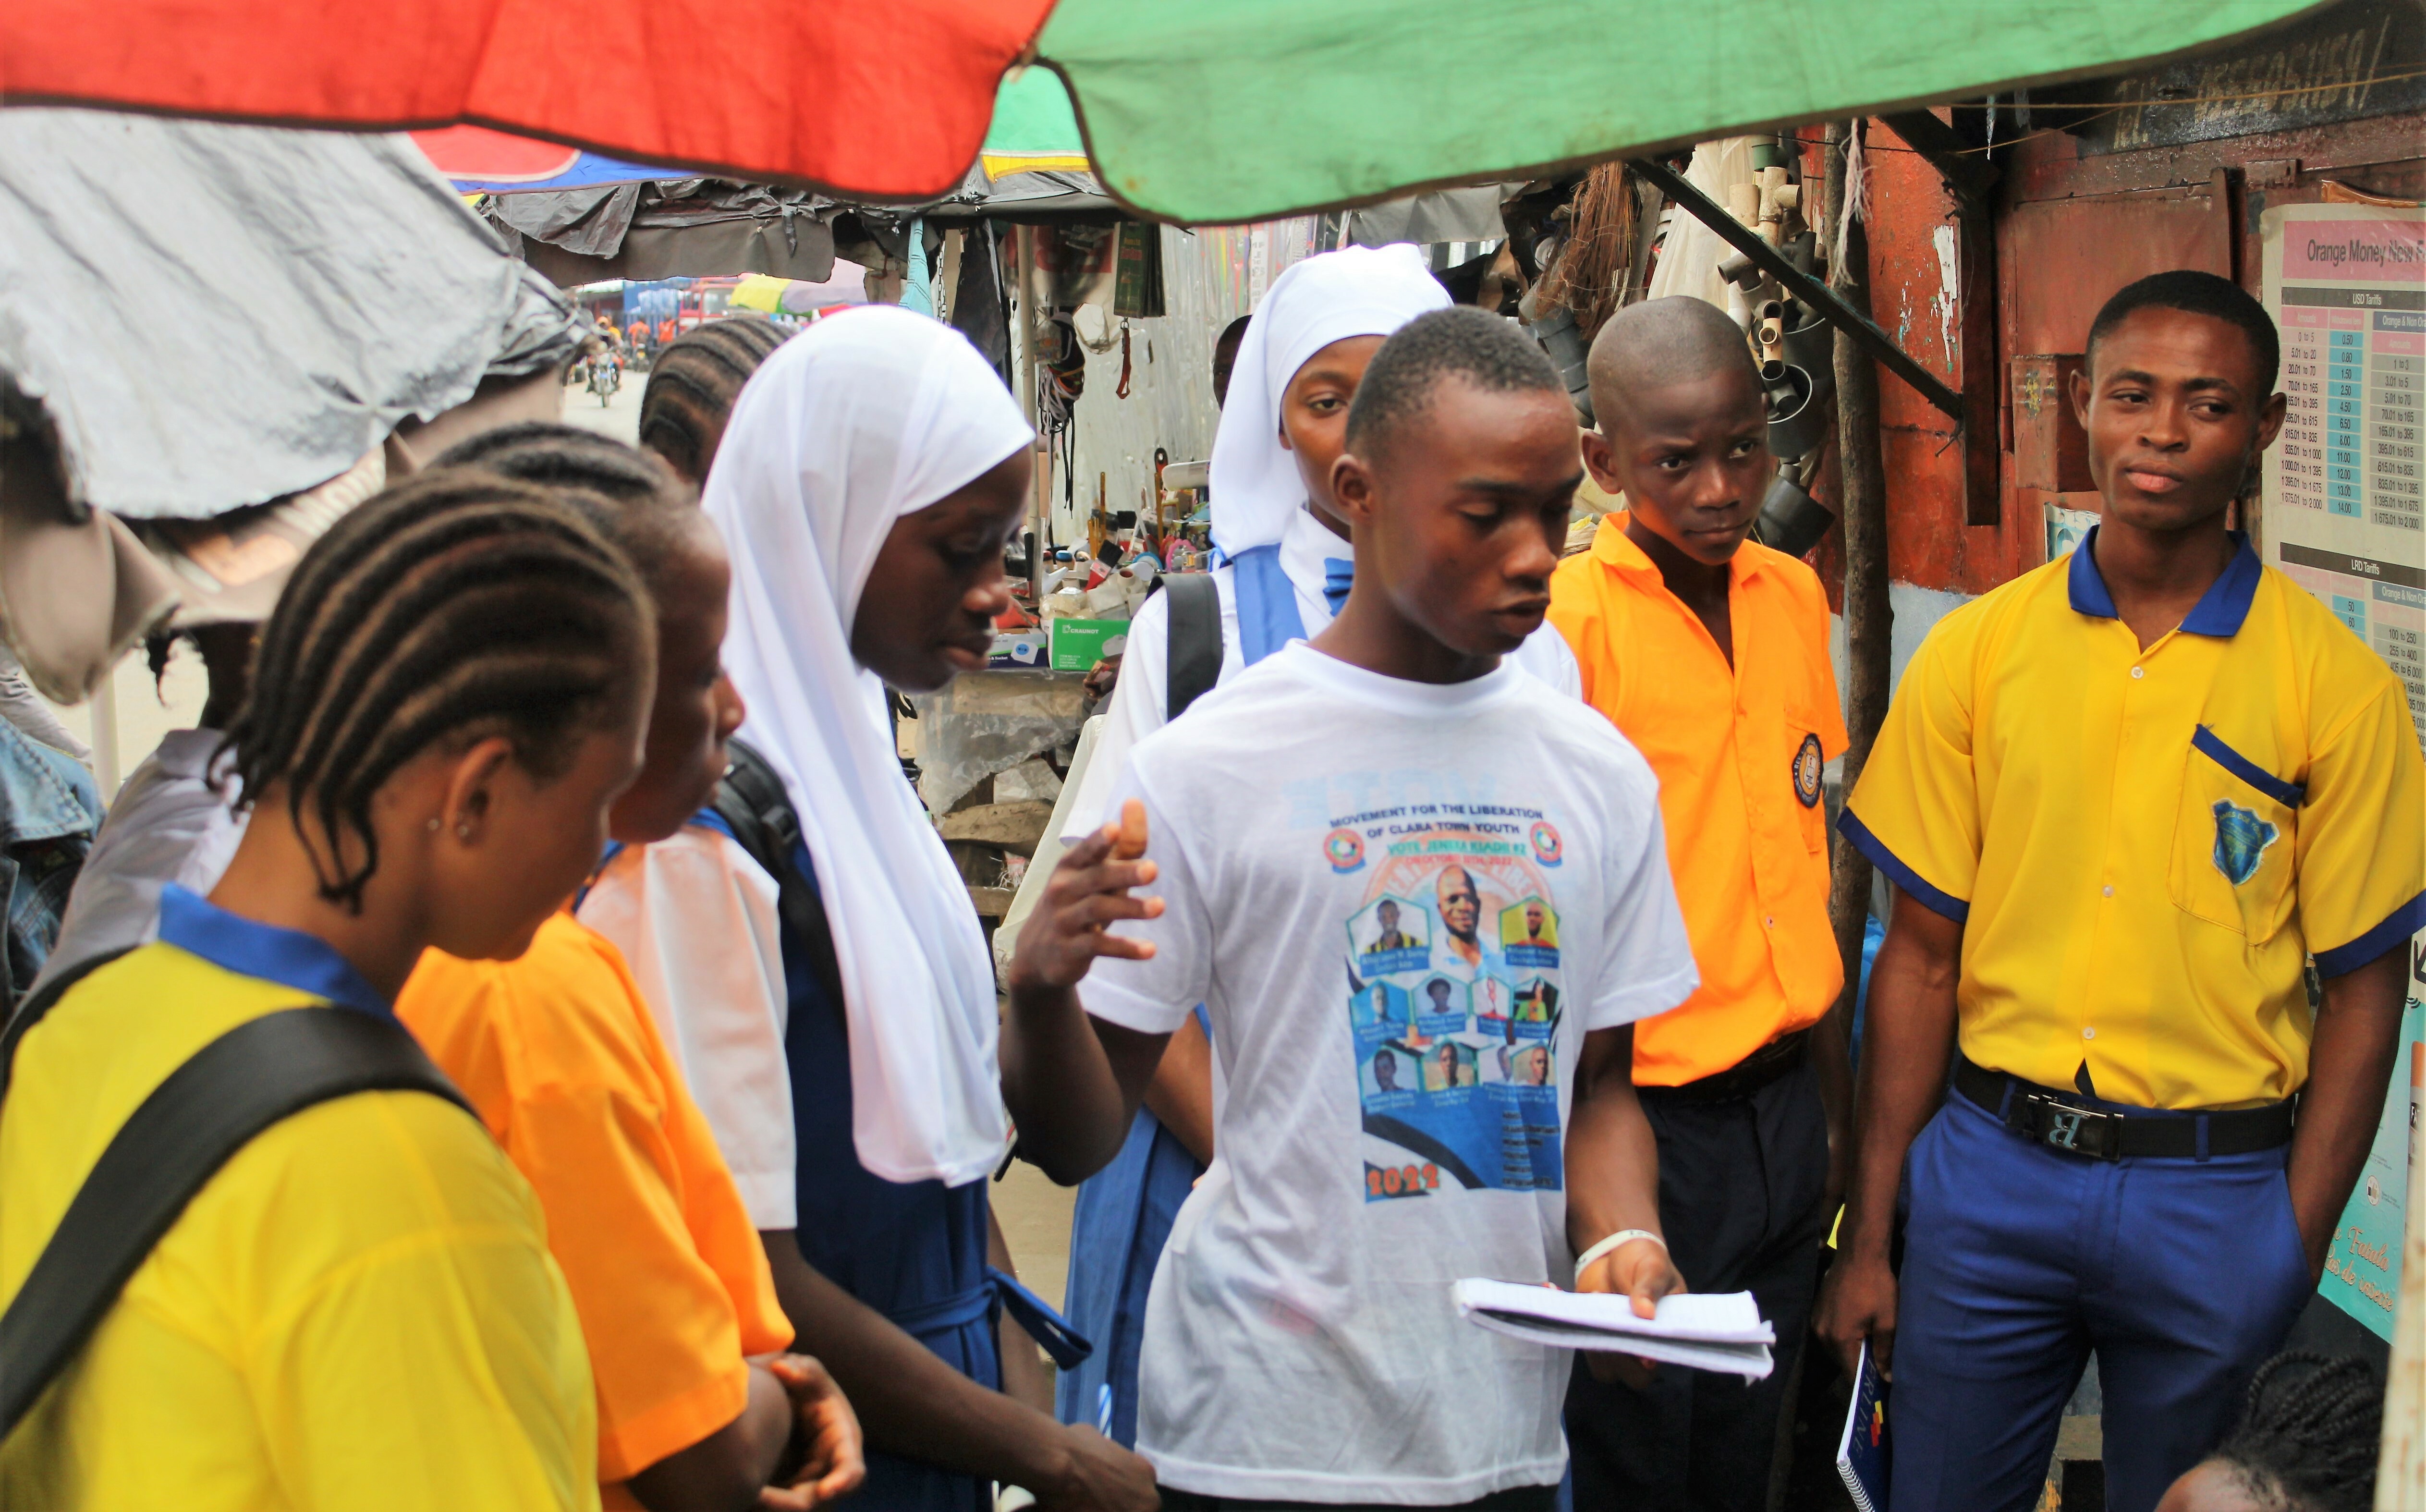 A Participant Is Talking To Shoppers At The Marketer About Ways They Can Reduce The Waste They Generate During Their Day To Day Activities